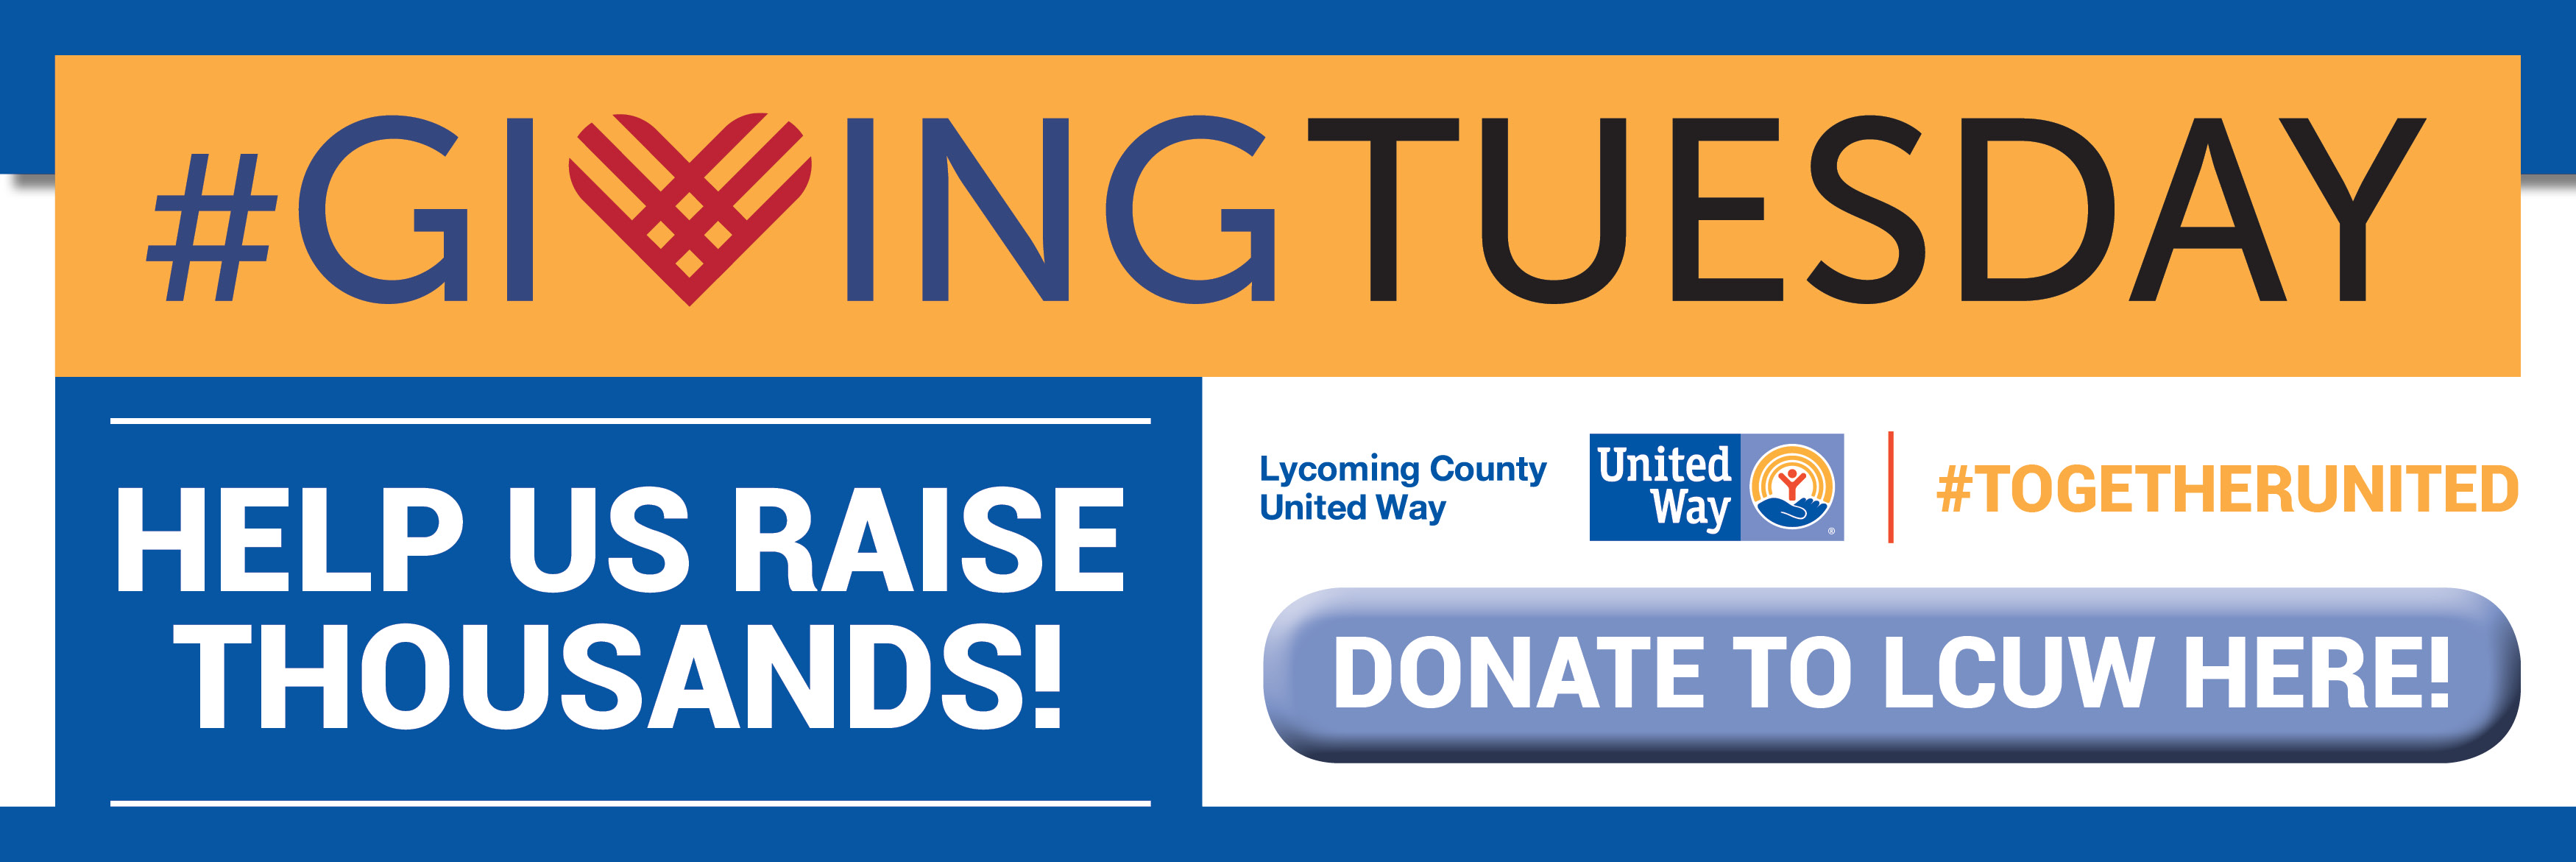 Donate During Giving Tuesday Today!